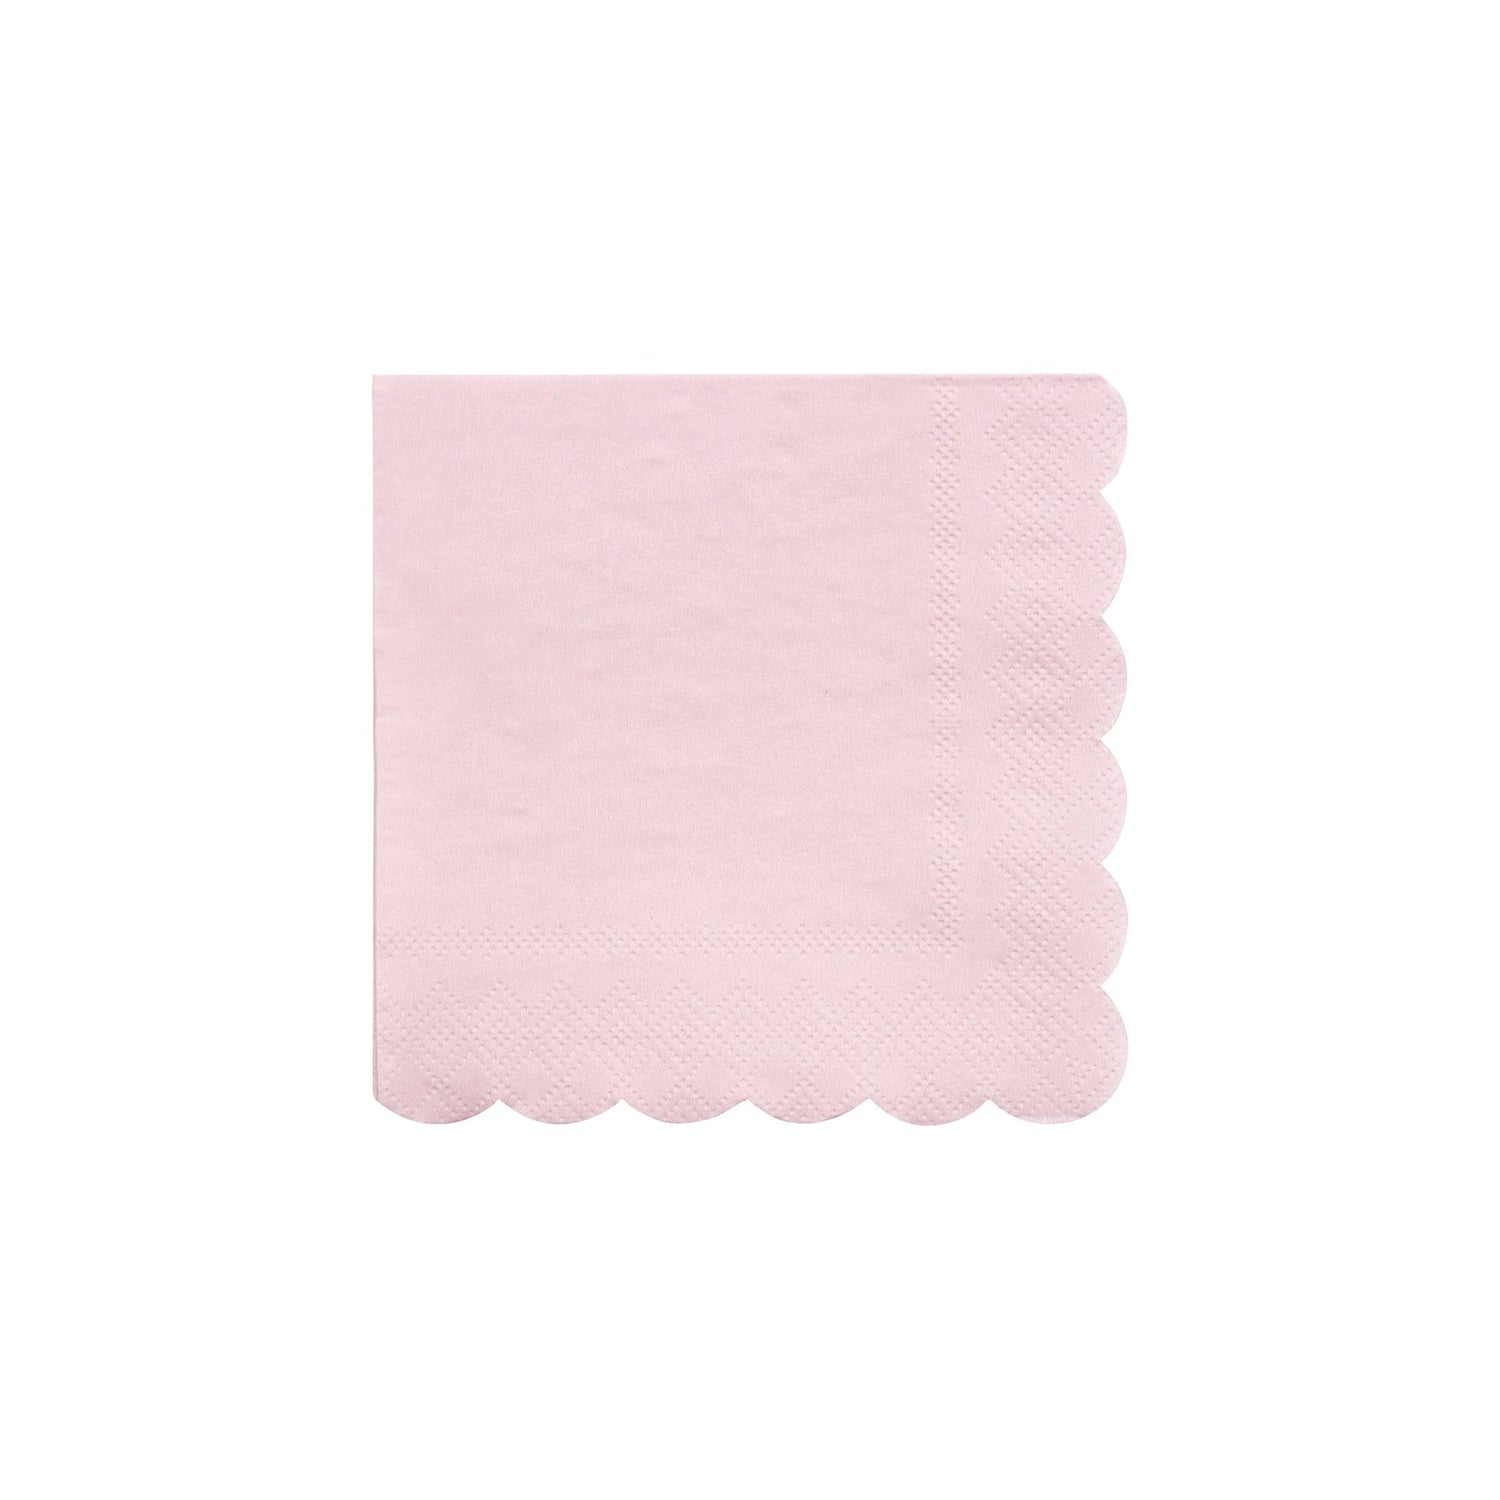 A Candy Pink Paper Napkin with a scallop edge on a white background by Meri Meri.